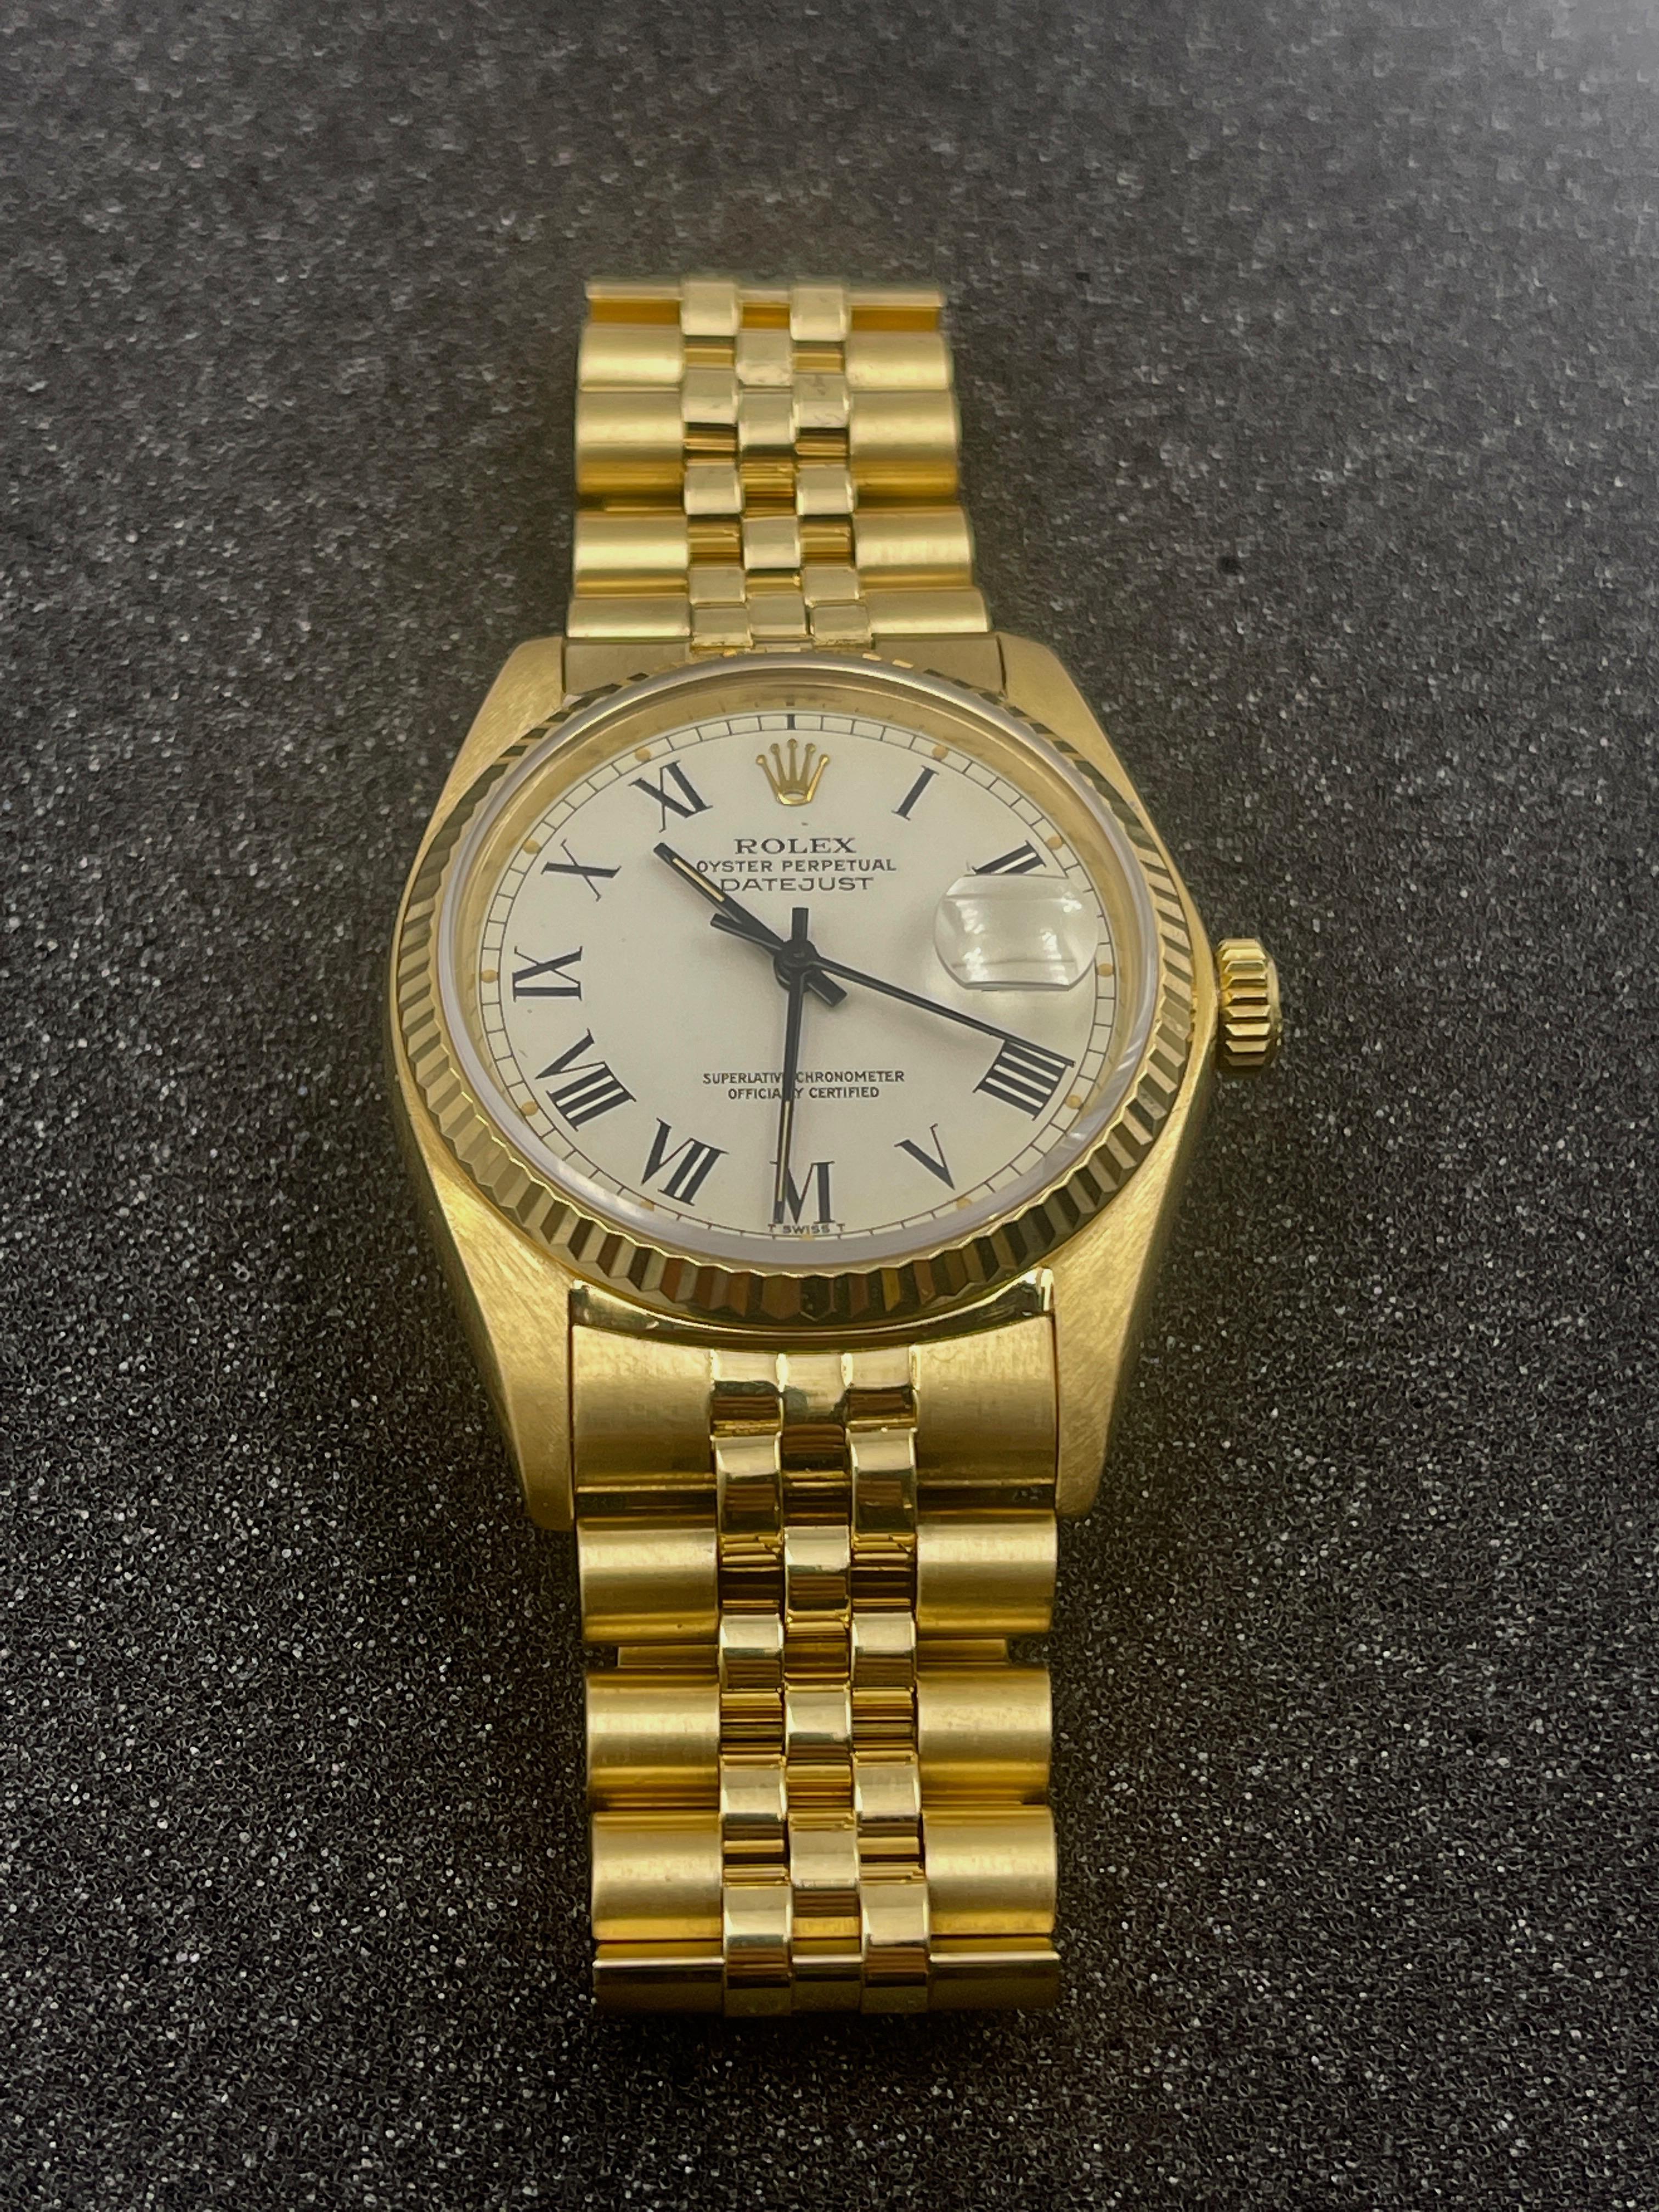 Rolex Datejust 18k Gold Reference 16018 Watch 6